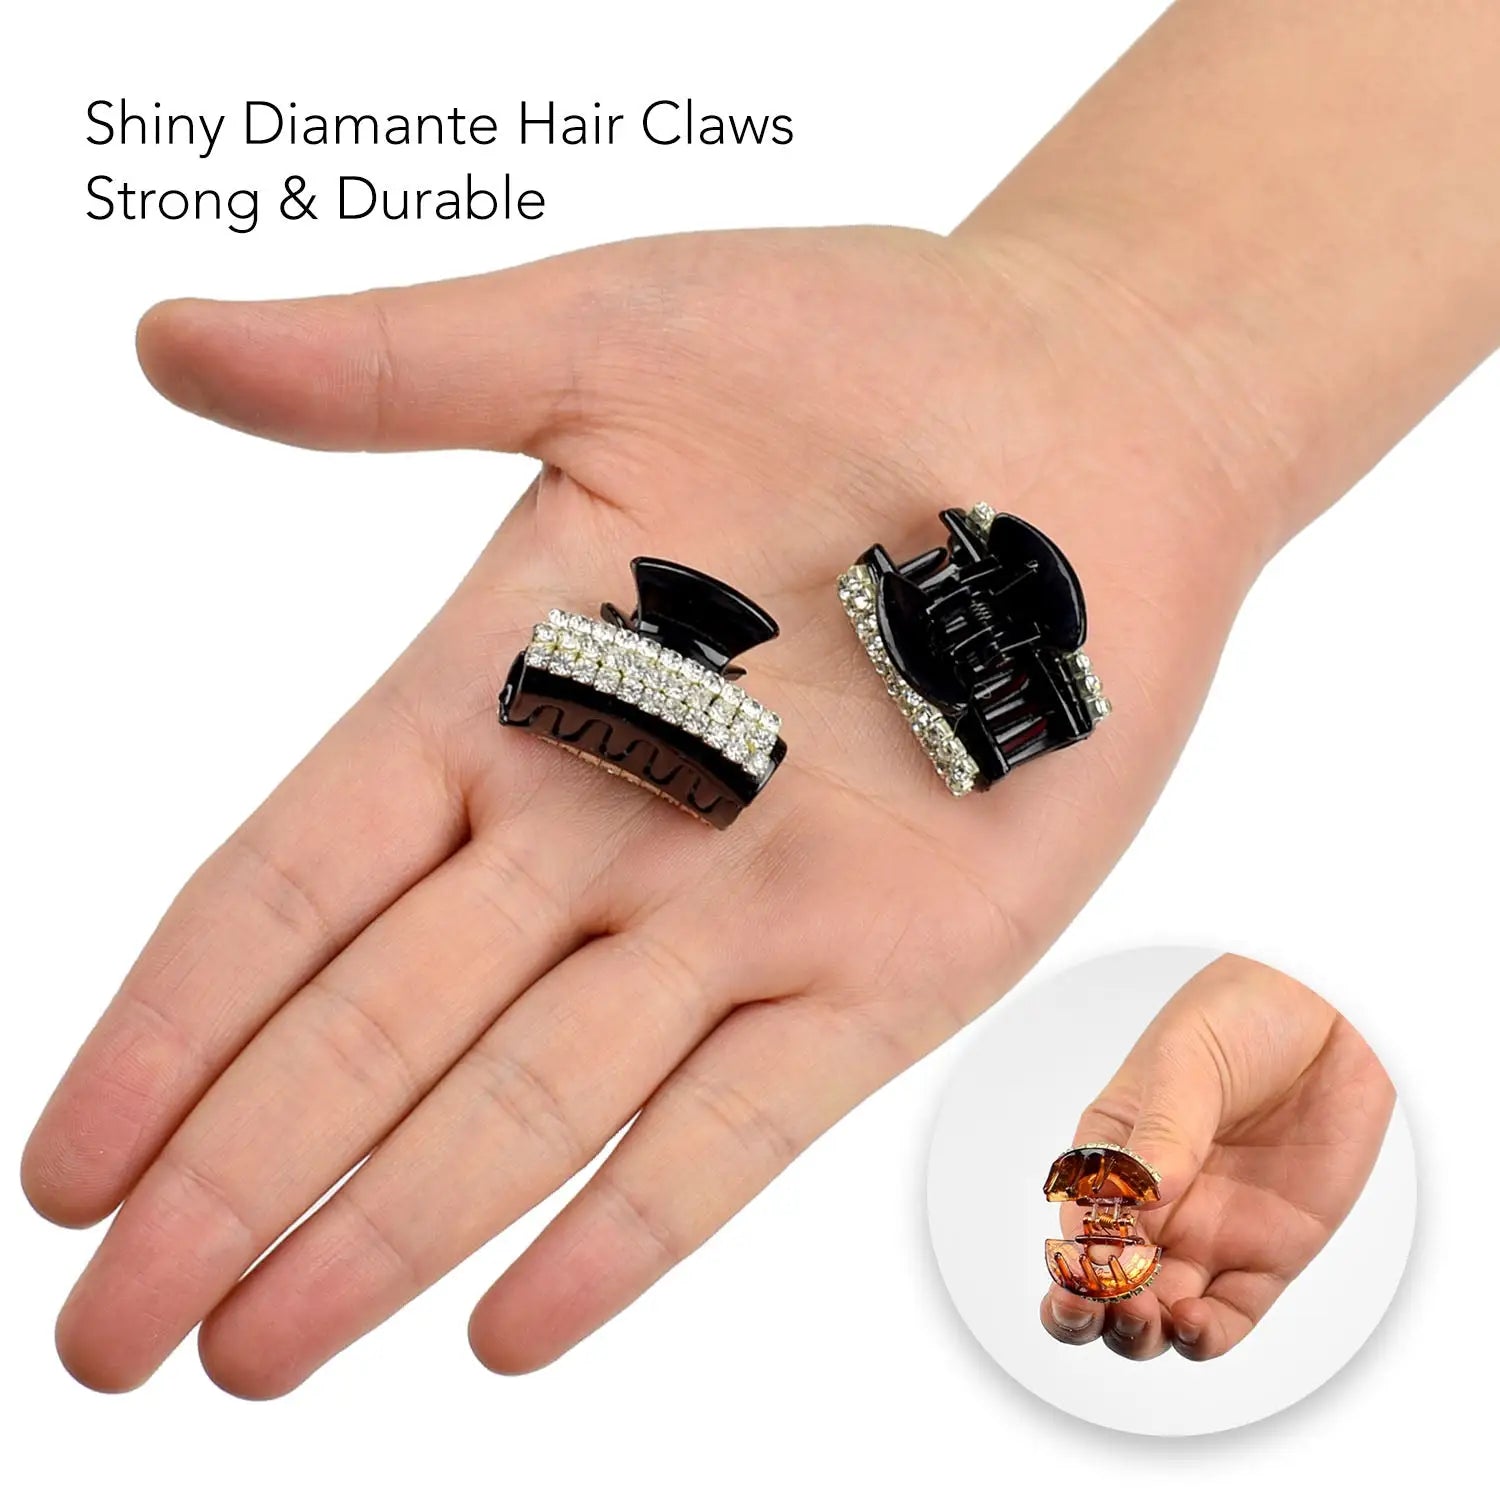 Mini Crystal Long Rectangle Hair Claw - Diamante Embellished Accessory, 2pcs - hand holding ring with hair claw